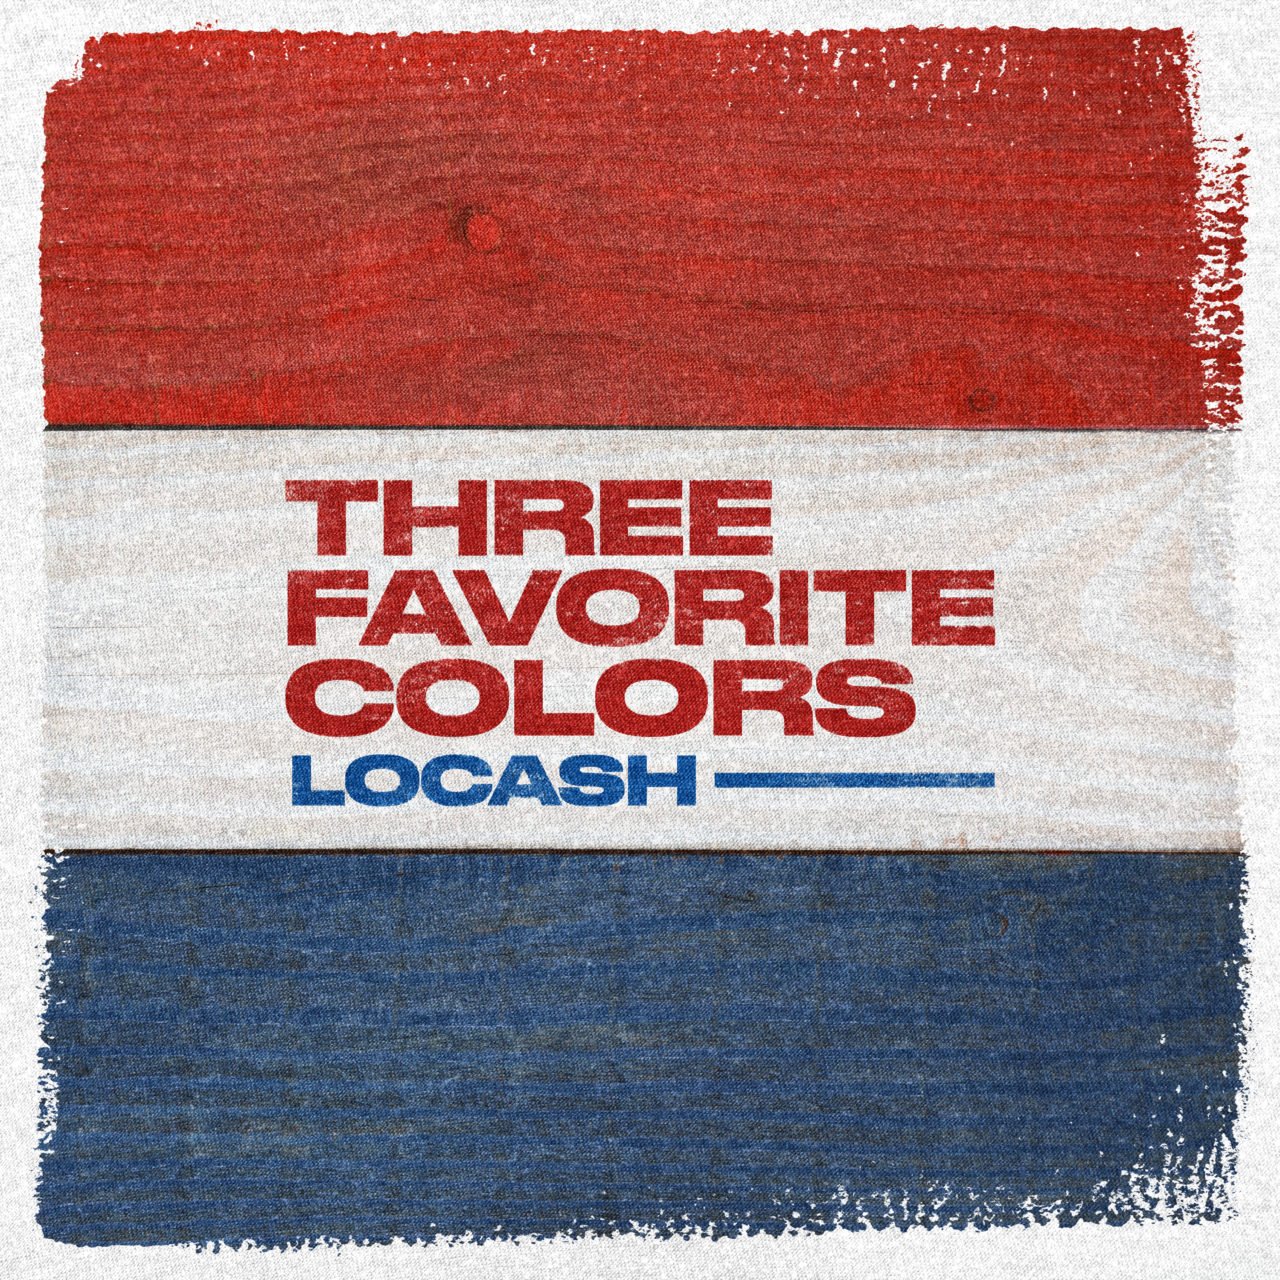 USA Made LOCASH delivers loud-and-proud anthem image image